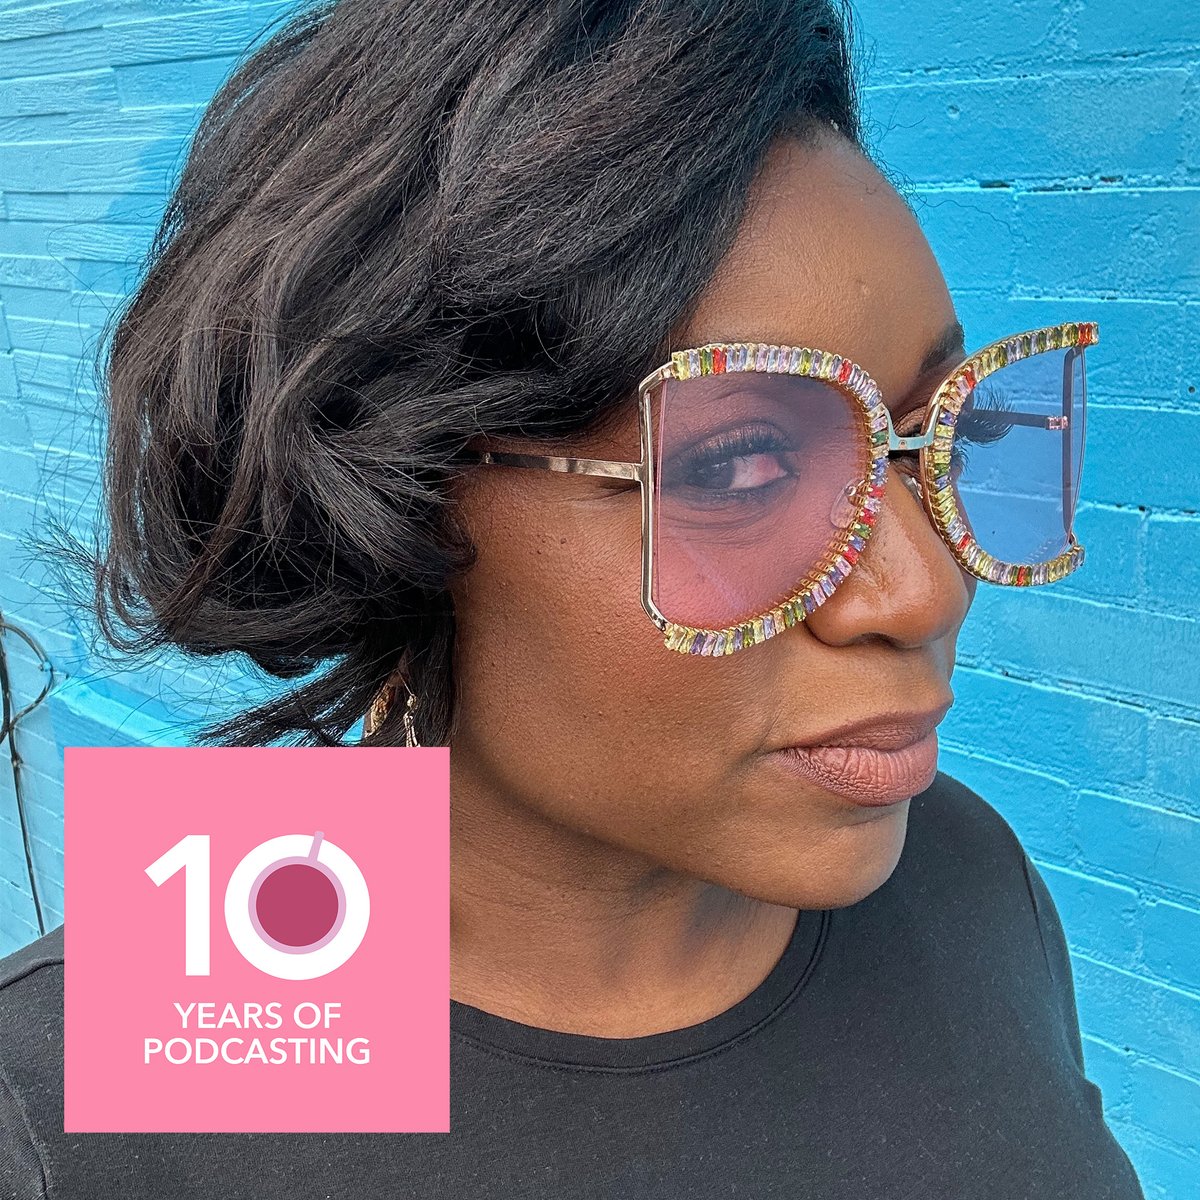 New episode! 

@DeeshaDyer talks with @danielfford about her book Undiplomatic: How My Attitude Created the Best Kind of Trouble. 

Listen: apple.co/3y9IUcX #writers #podcast #writingcommunity #WBPN